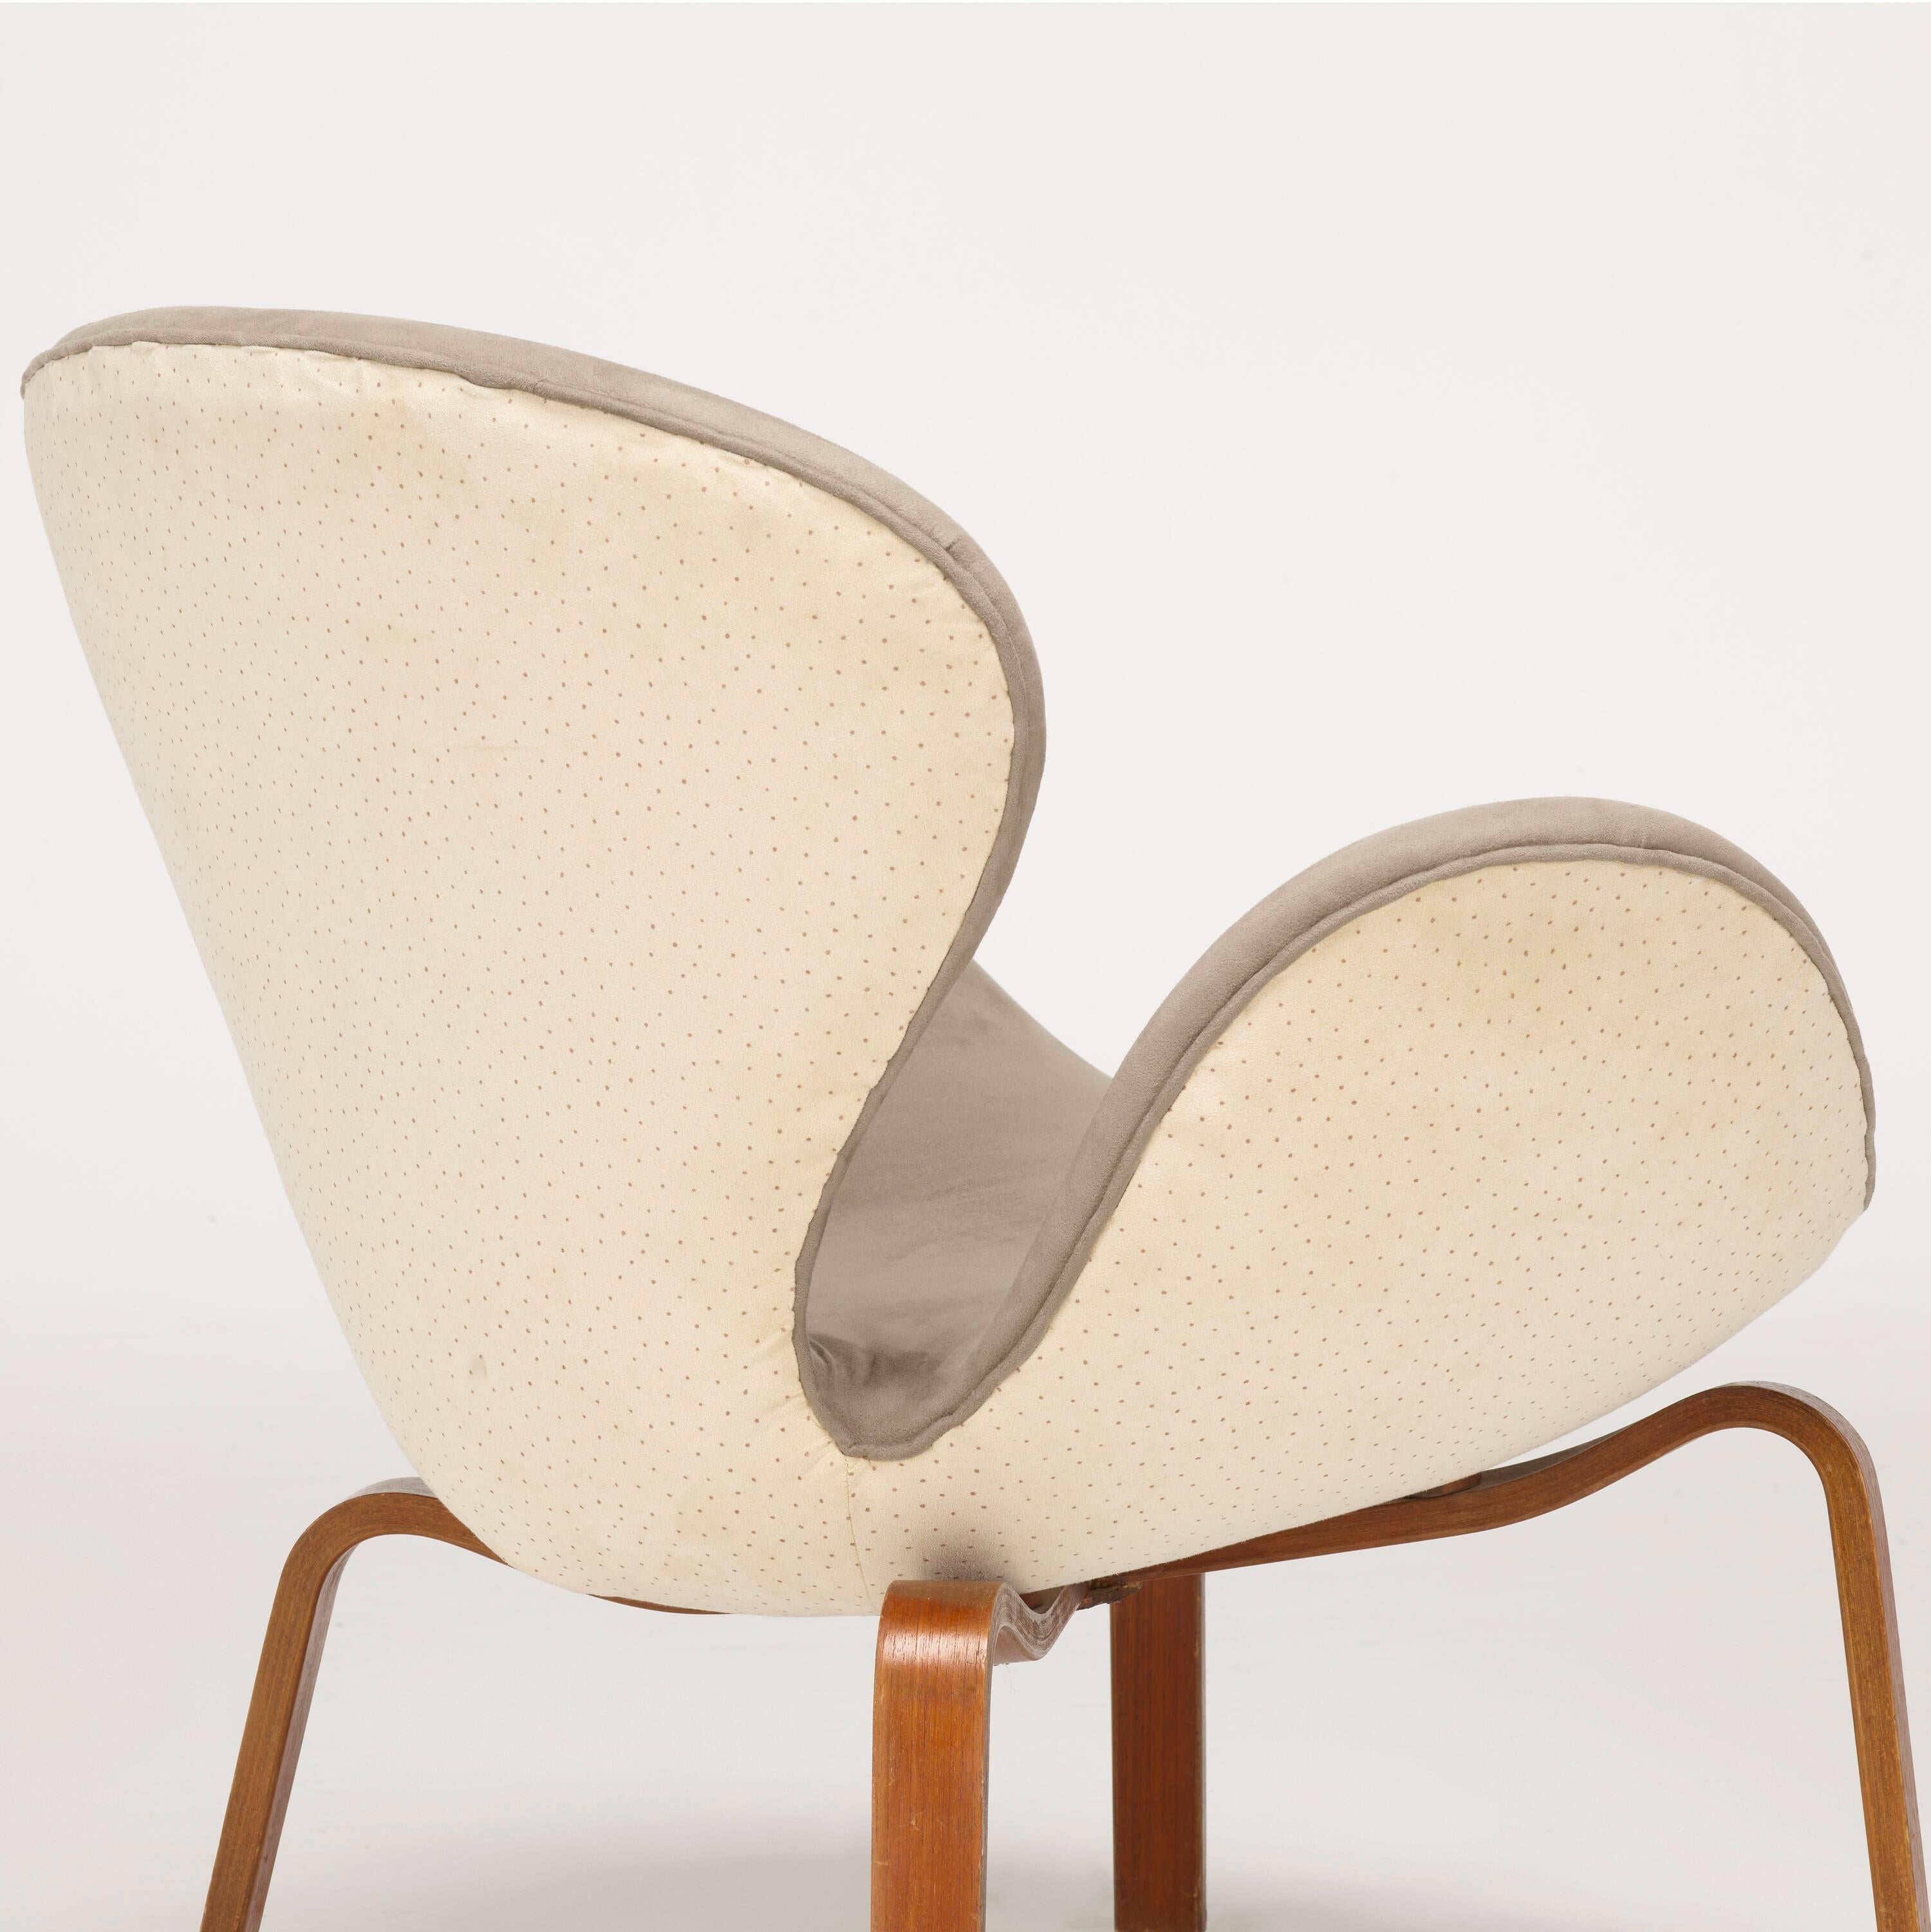 Danish Early 'Swan' Chair Model No. 4325 by Arne Jacobson